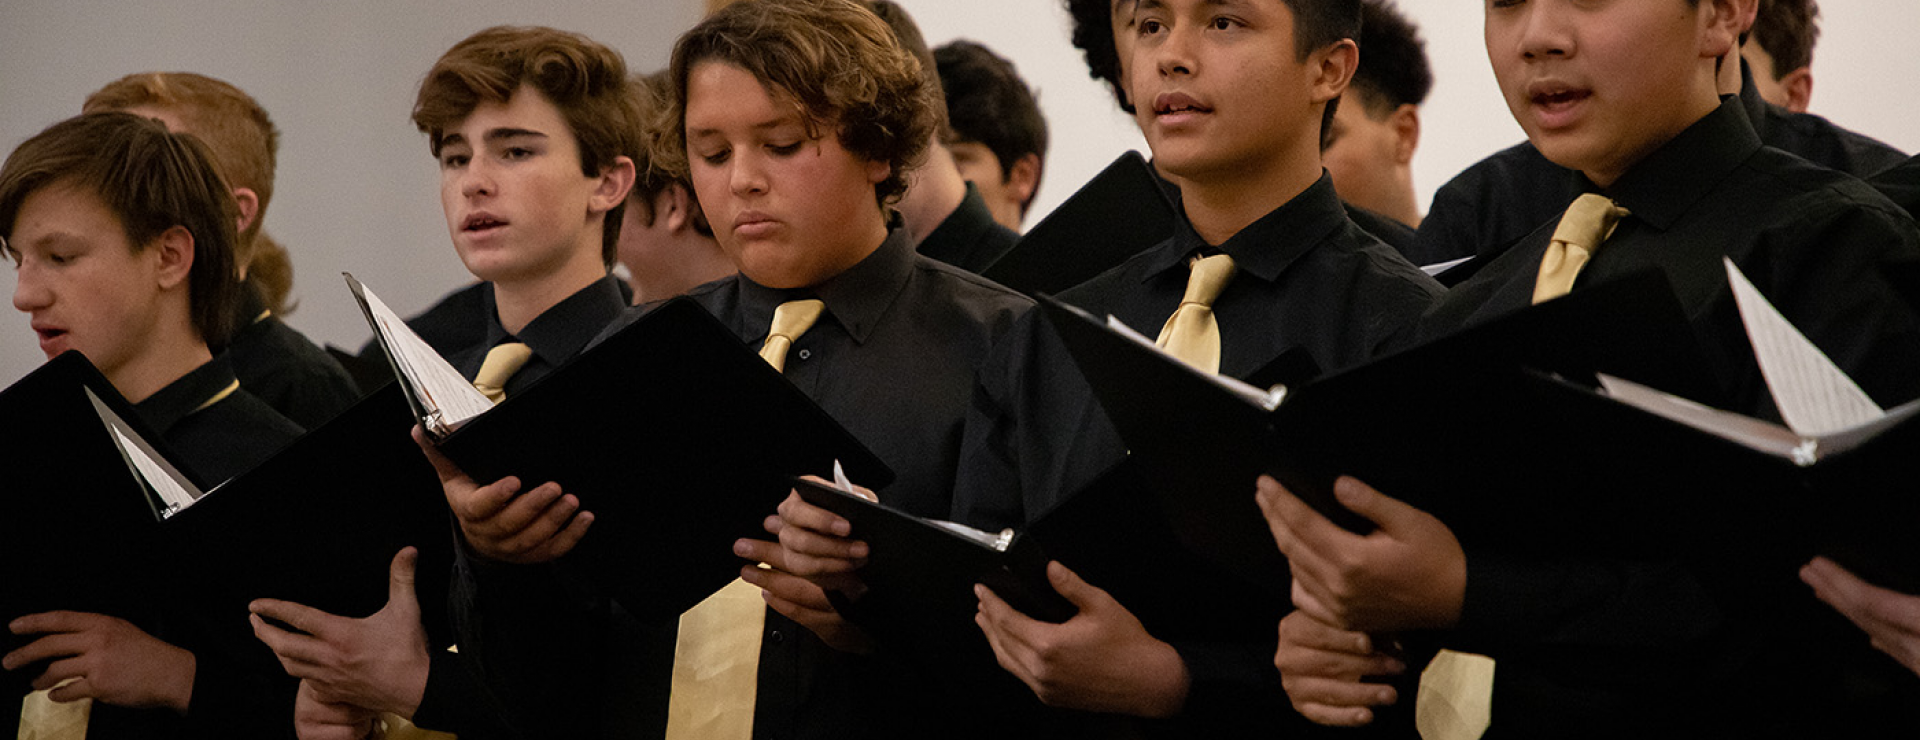 Row of boys singing at a concert. Wearing all black with gold ties and holding song books. 